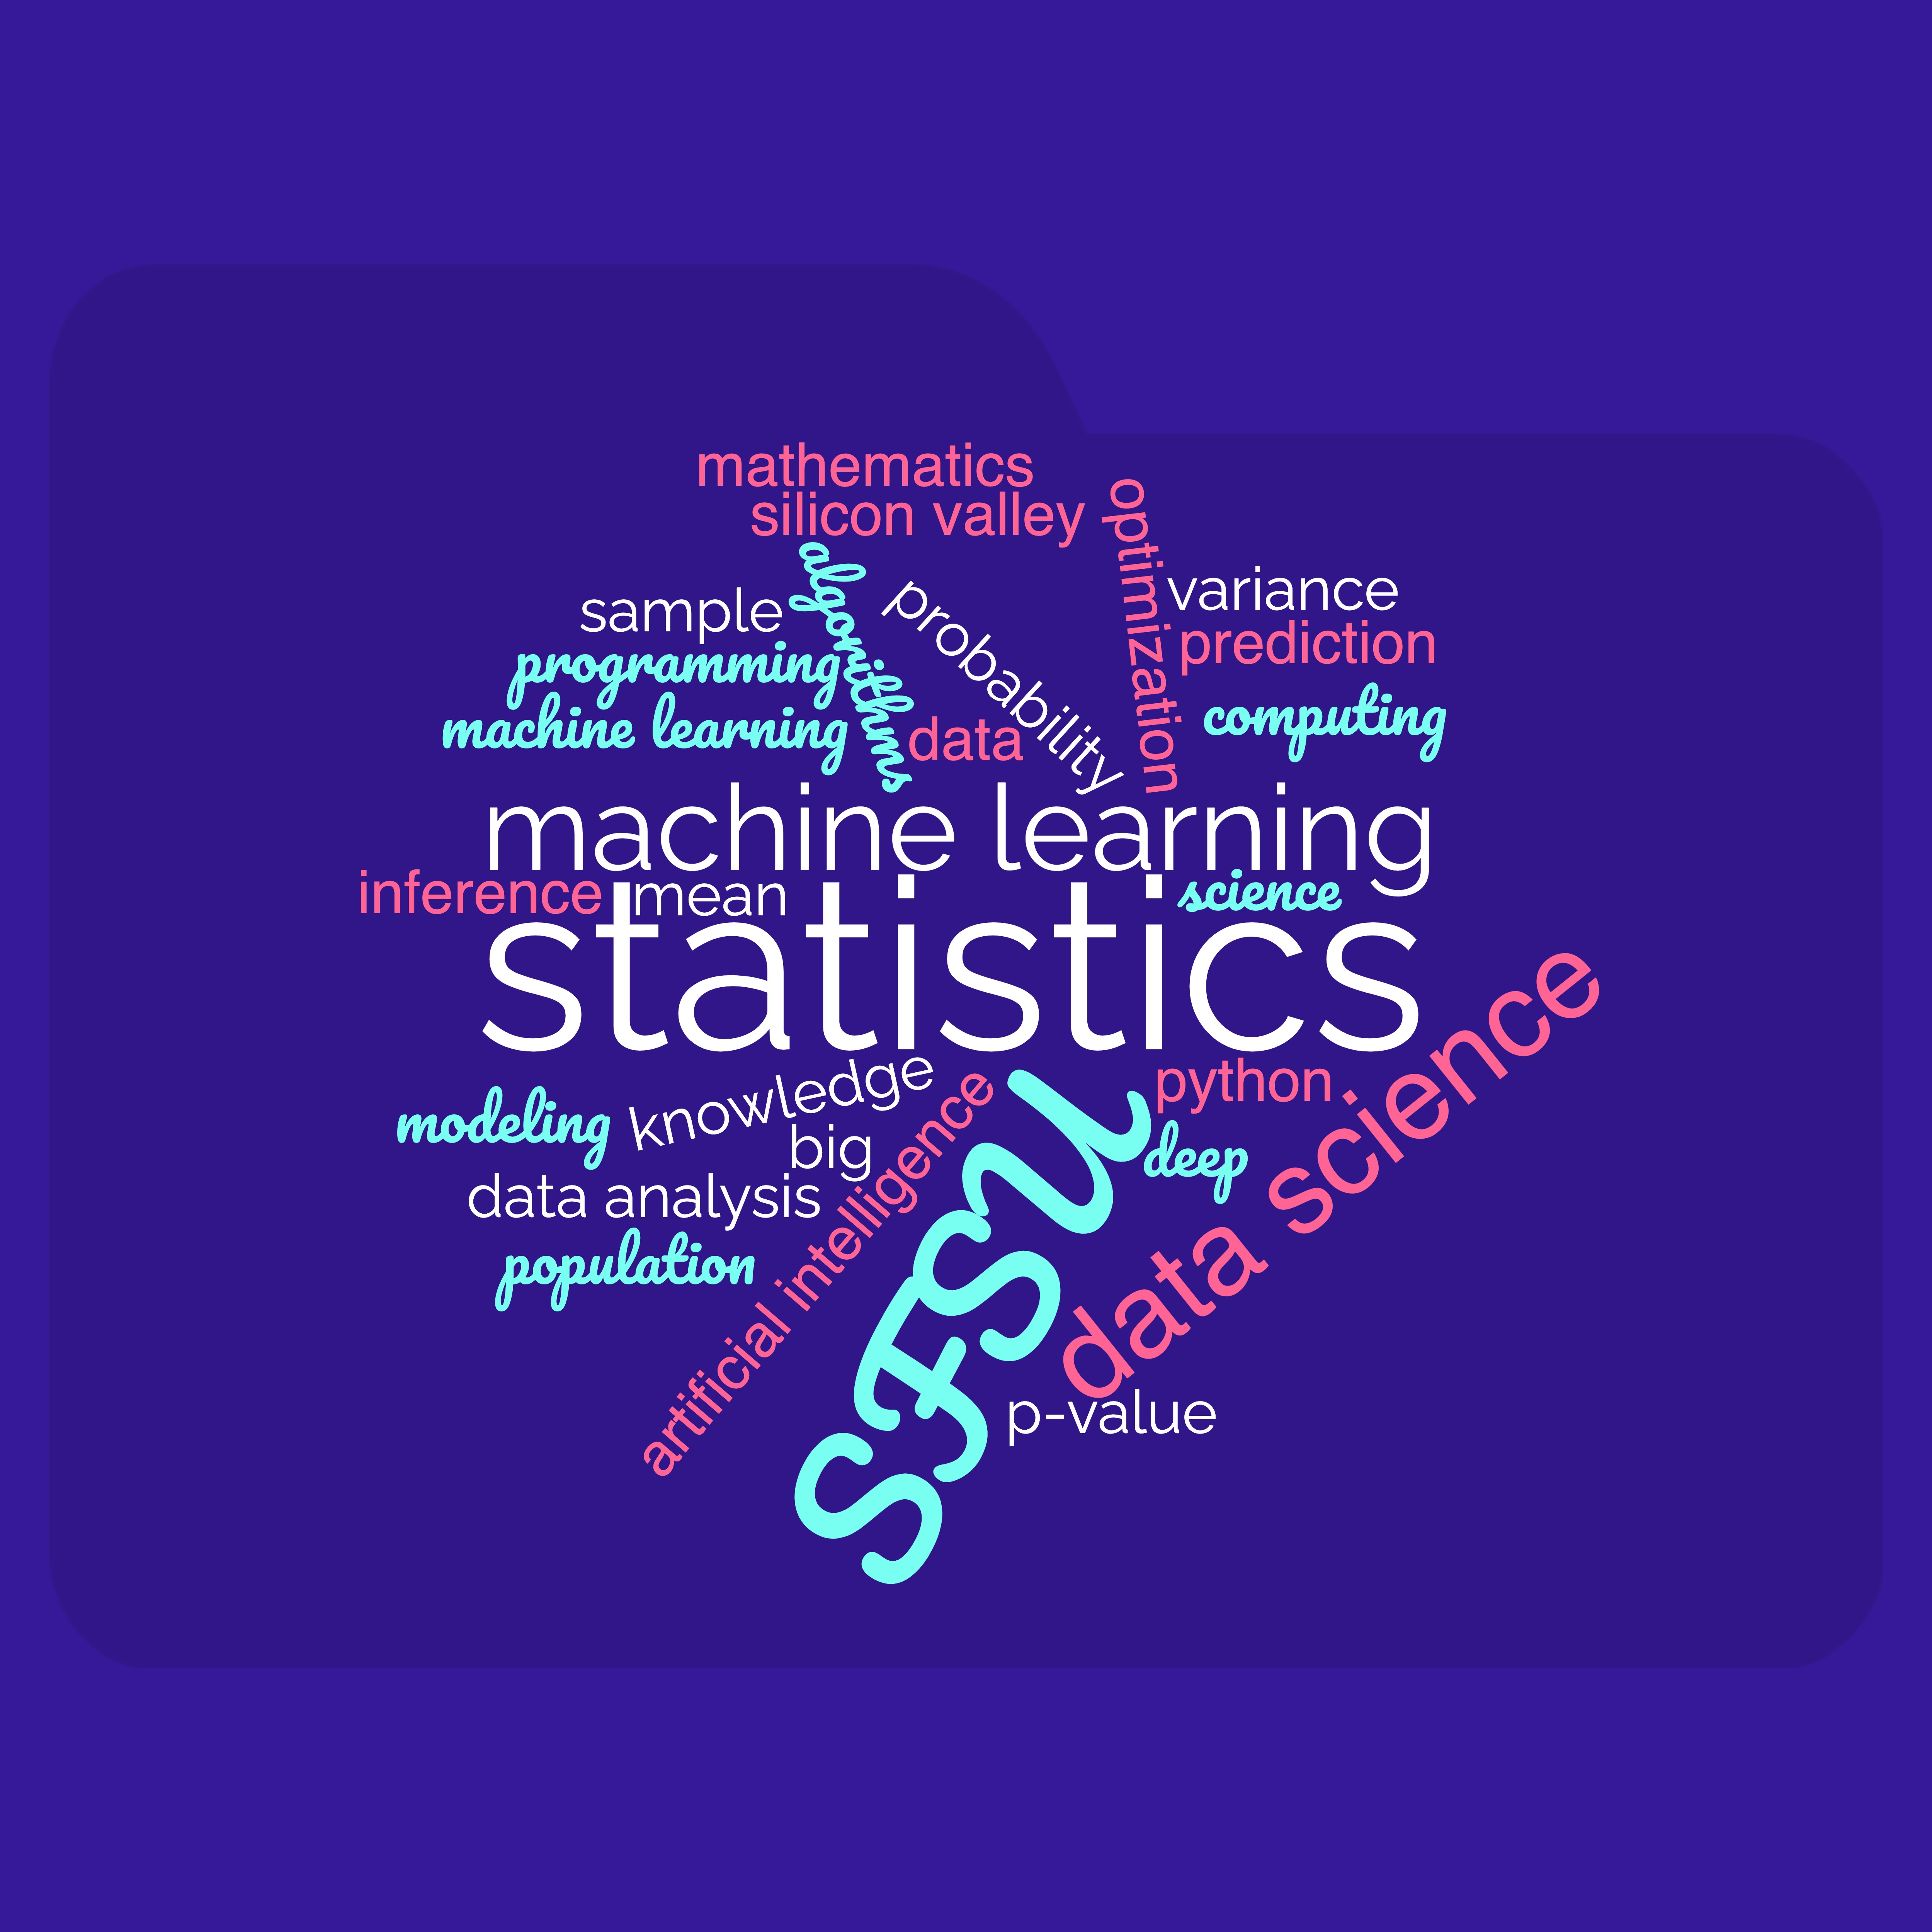 A word cloud of terms in SFSU's data science program